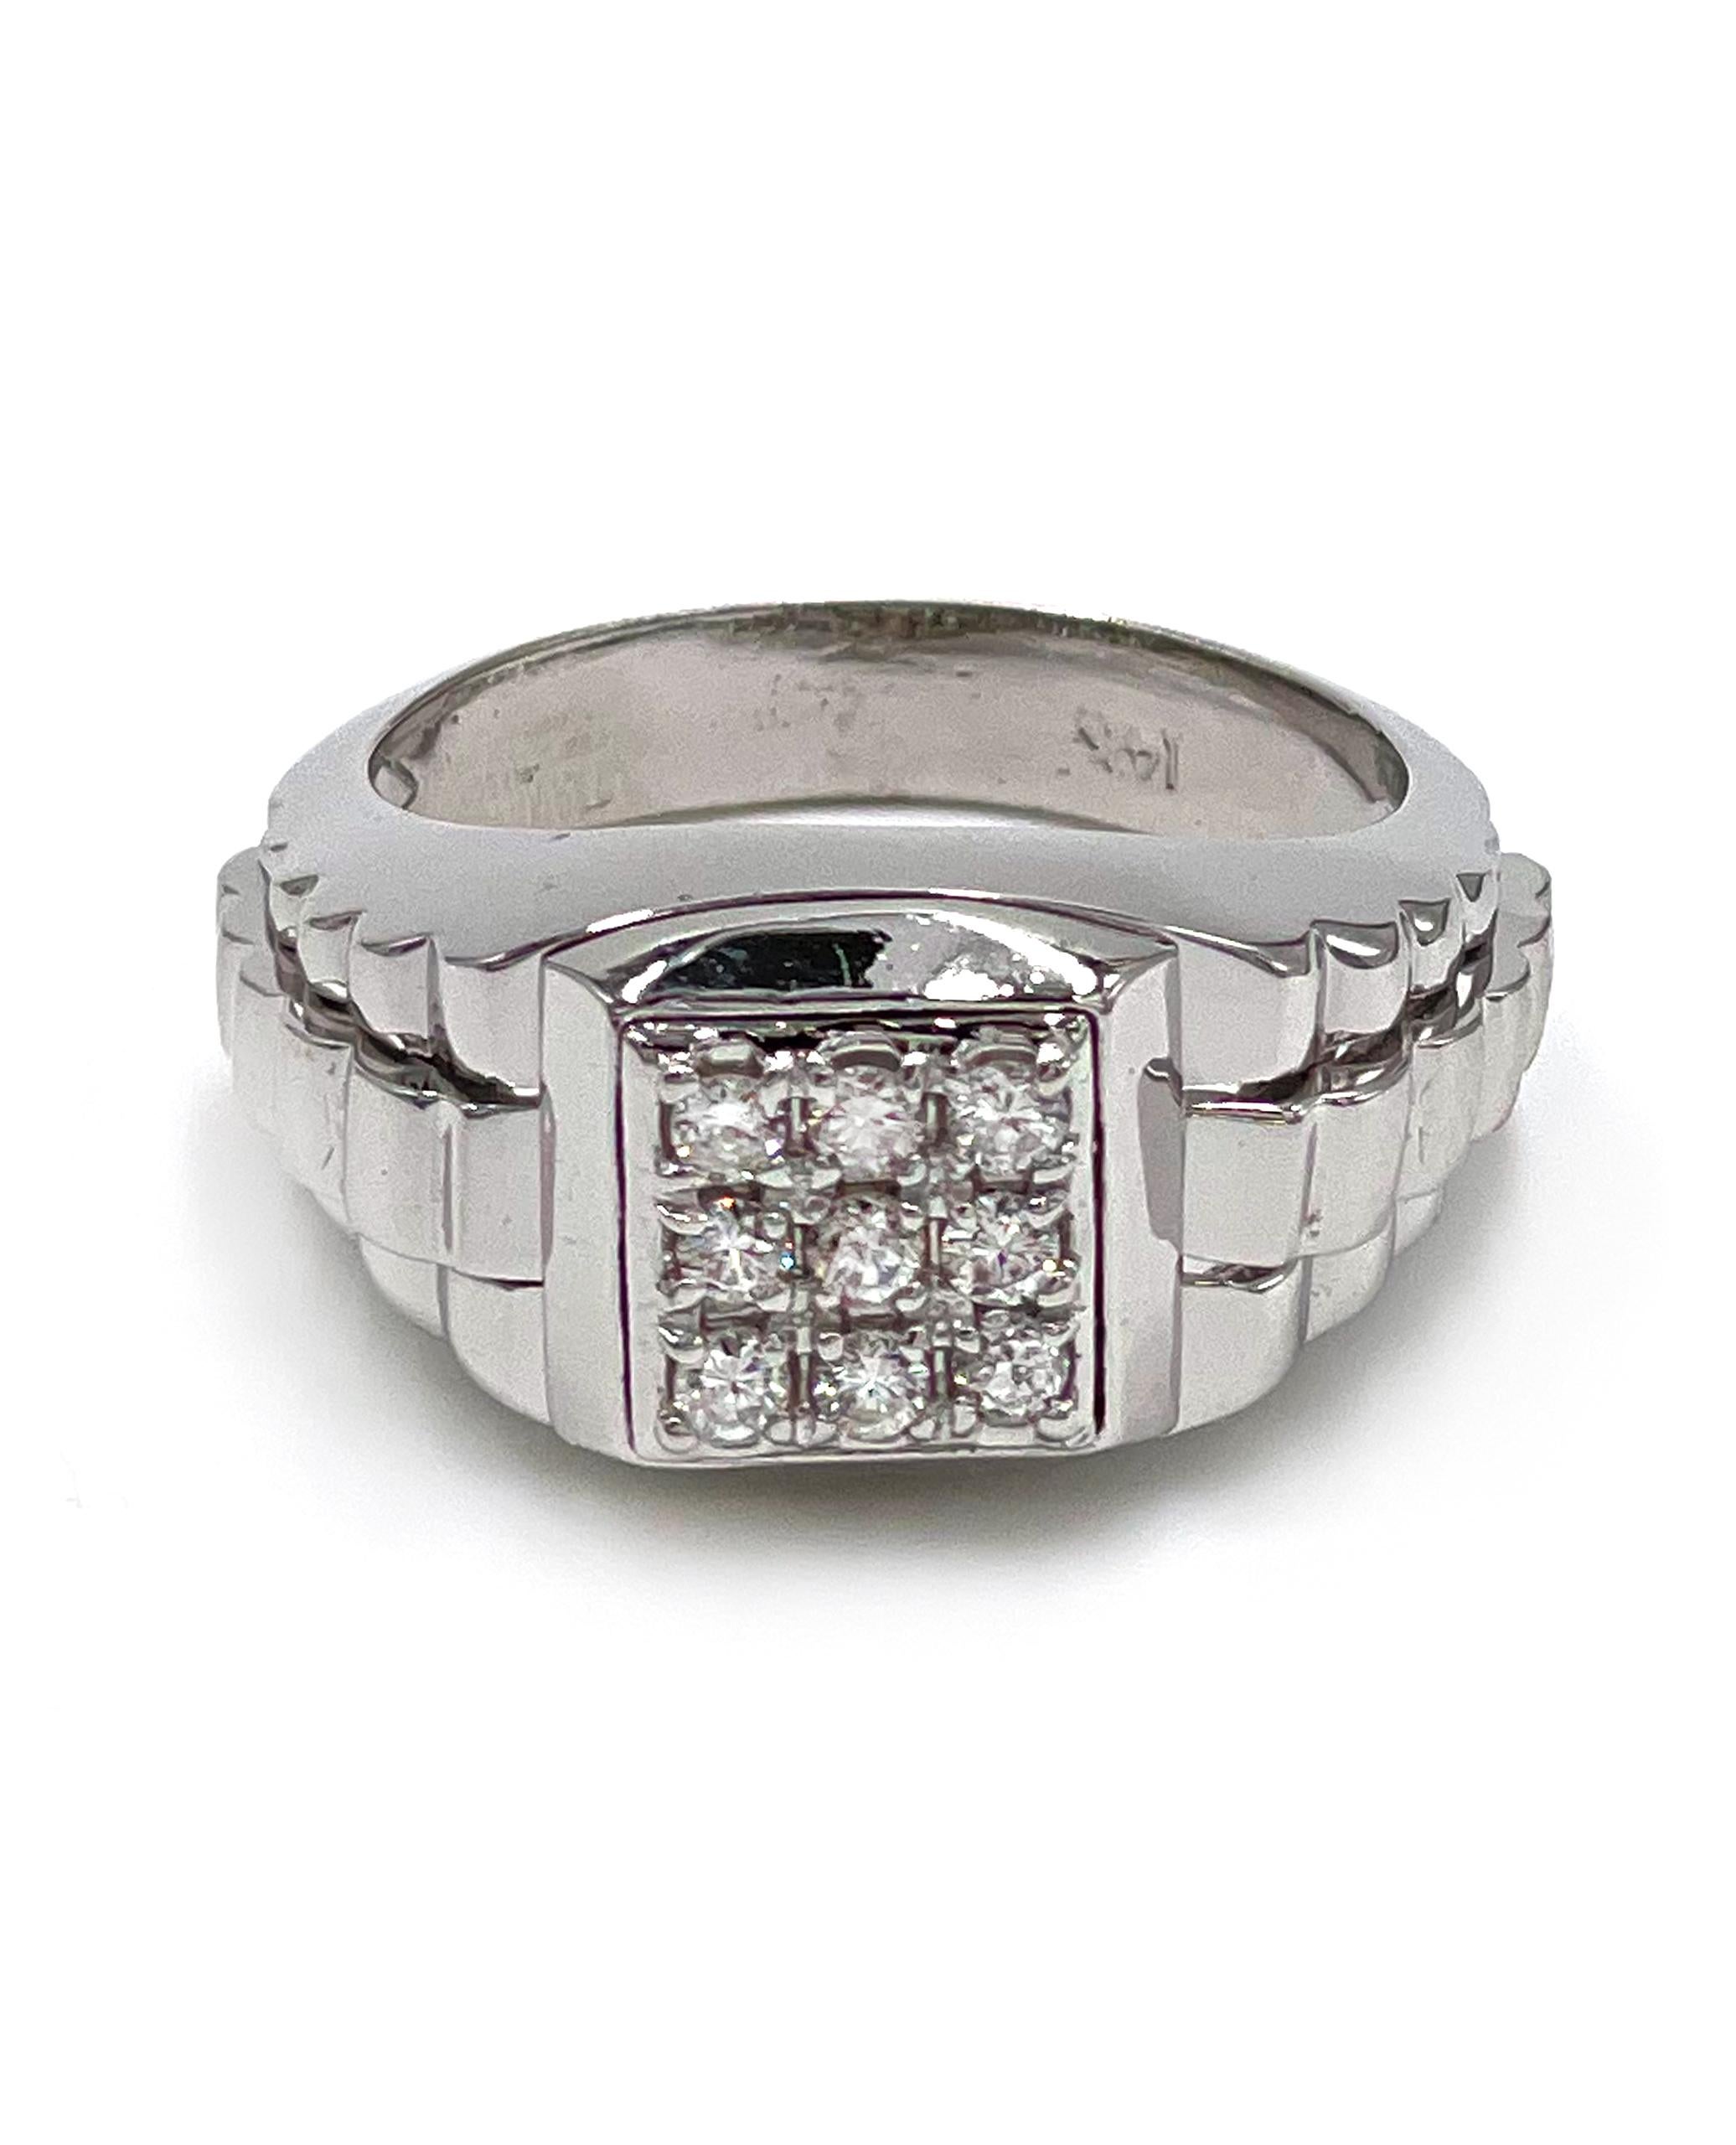 14K white gold men's ring with 9 round brilliant cut diamonds 0.35 carat total weight. 

* Finger size 9.75 (can be sized upon request).
* Diamonds are H/I color, SI clarity.
* Top width 12mm and tapers down to 4.5mm.